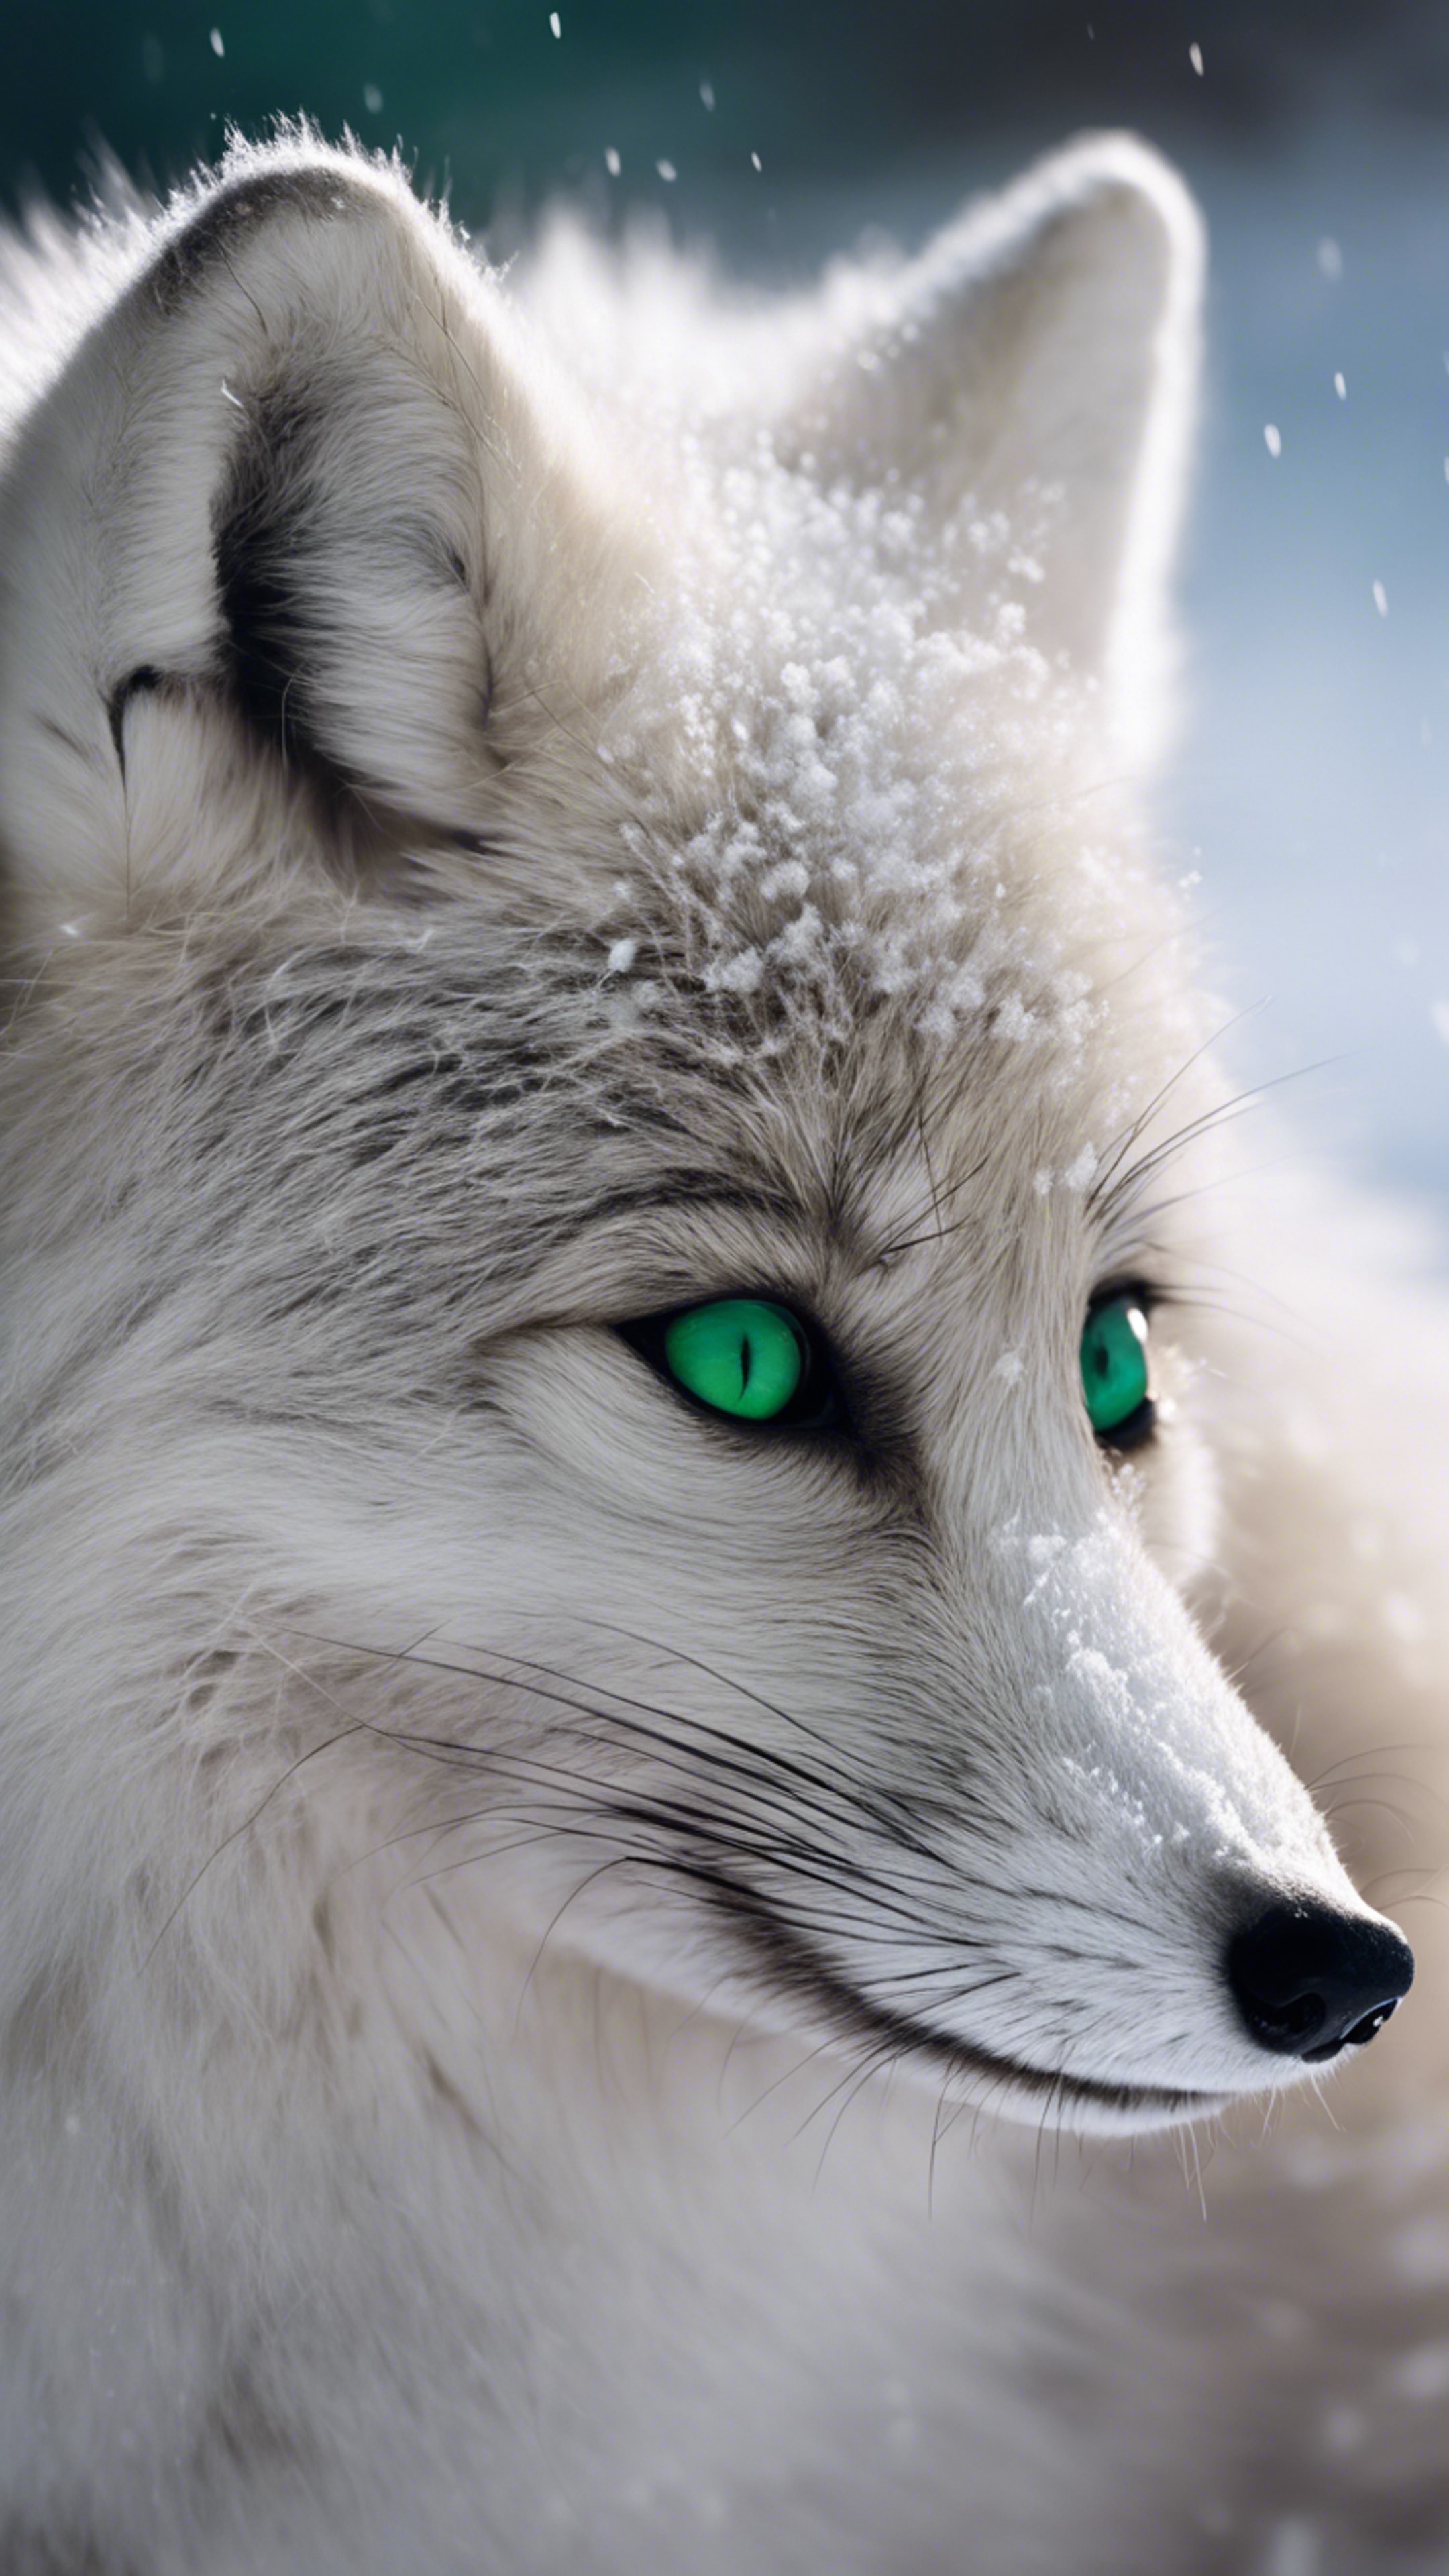 A fluffy, smoky gray arctic fox curled up in a snowy setting, its vivid green eyes staring directly at the viewer. Ταπετσαρία[a0ededdcc5bf4726bdb5]